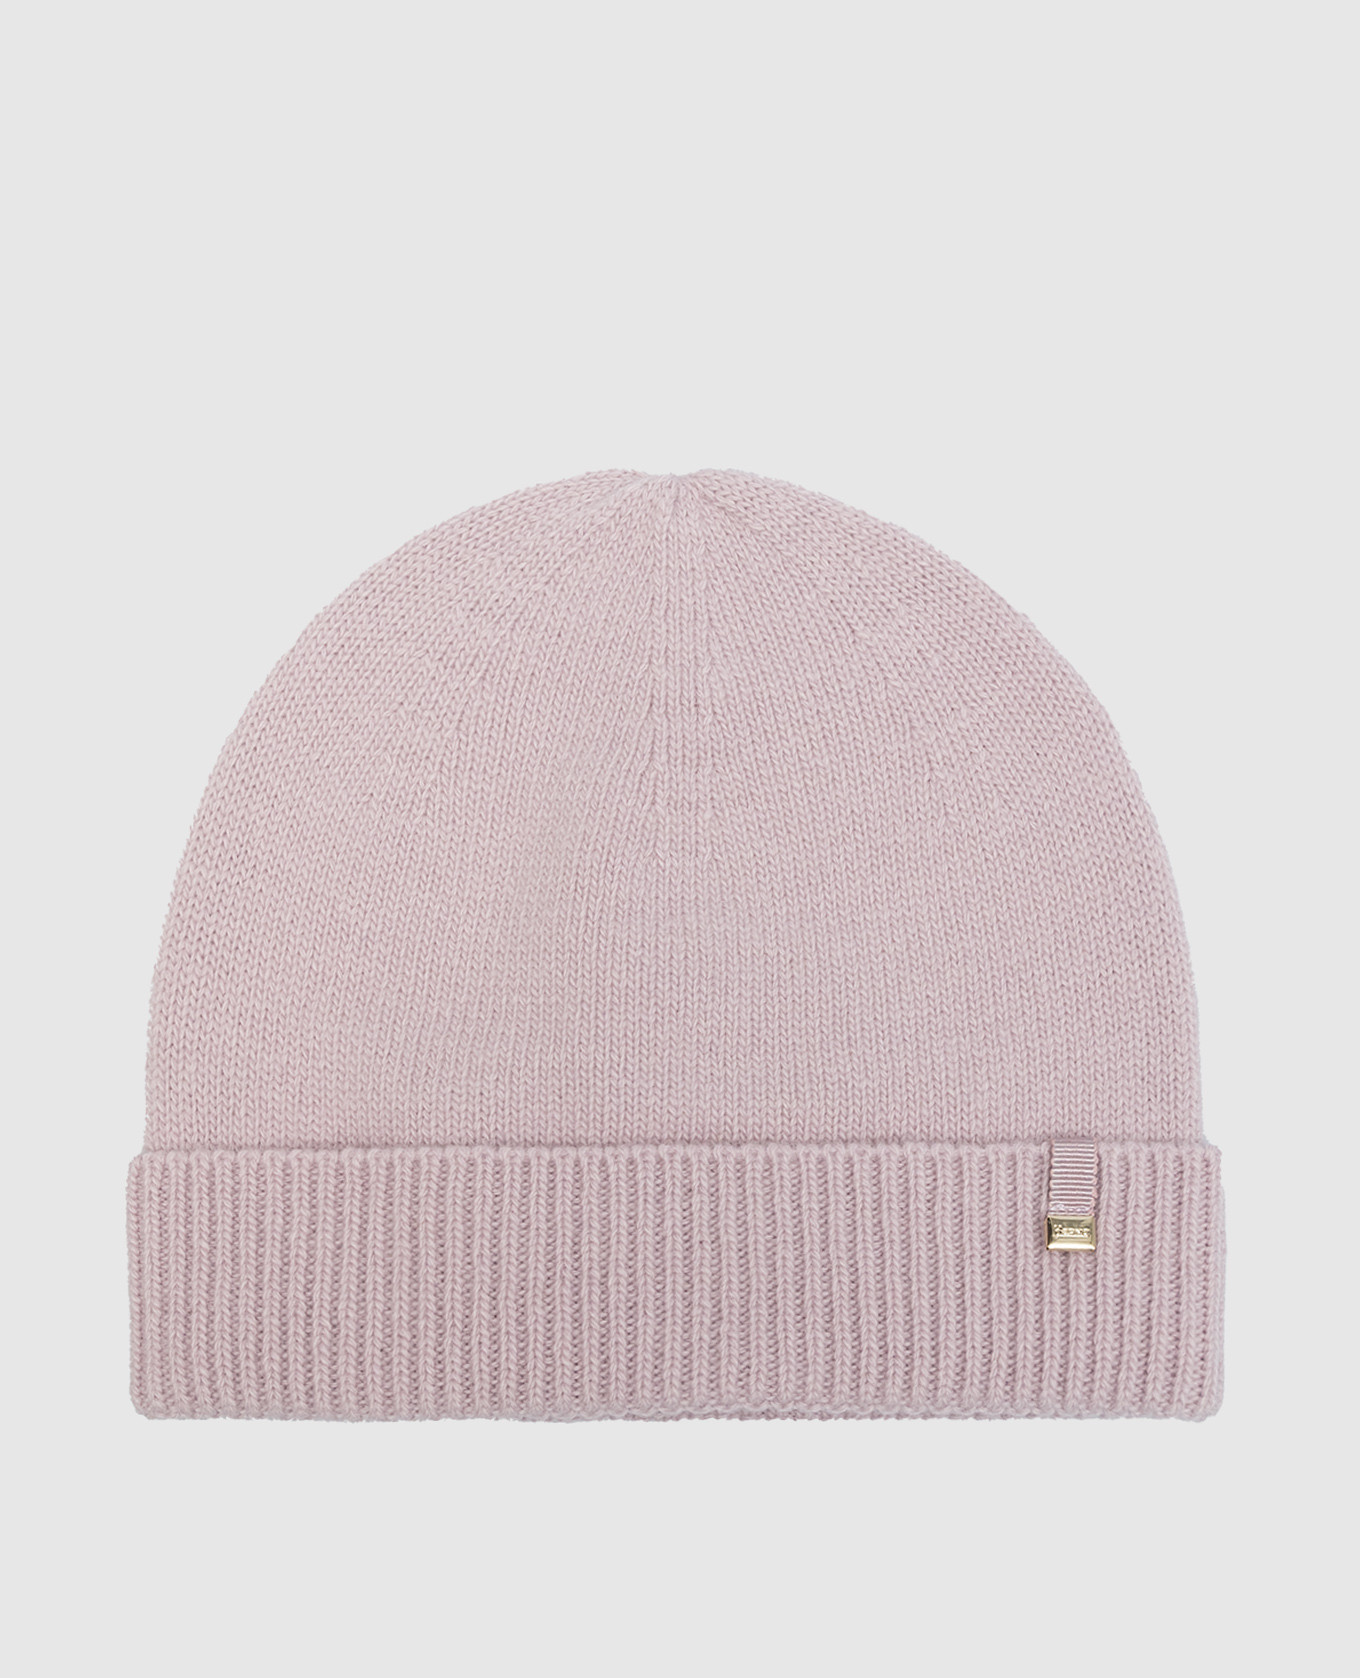 Pink hat made of wool